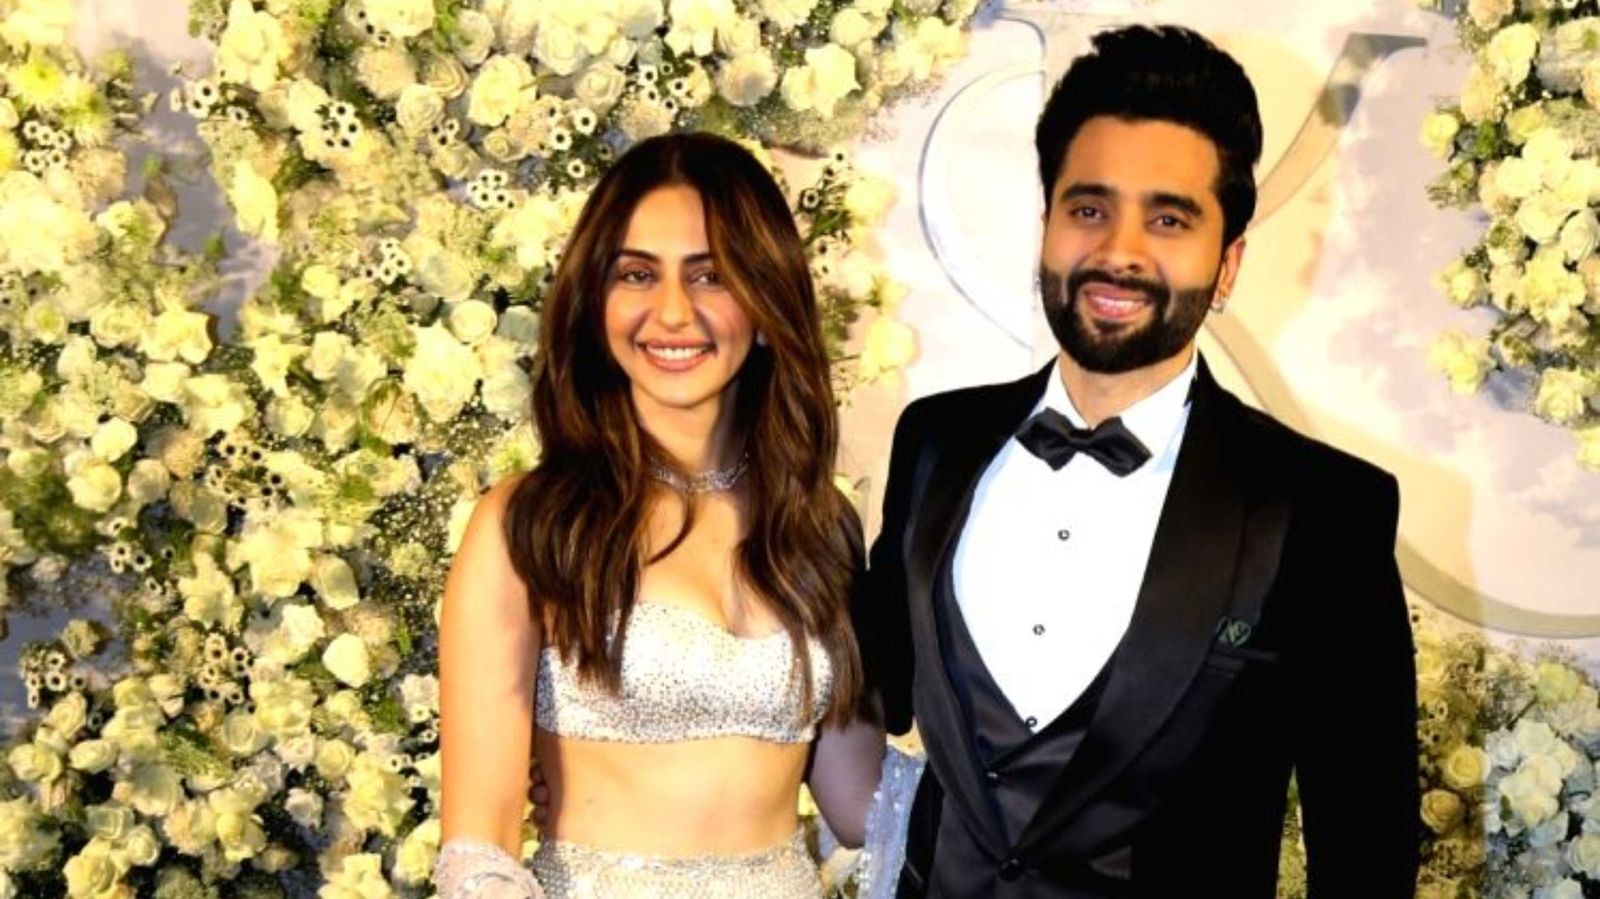 Rakul Preet Singh and Jackky Bhagnani were going to get married in November? Here’s what the actress has to say